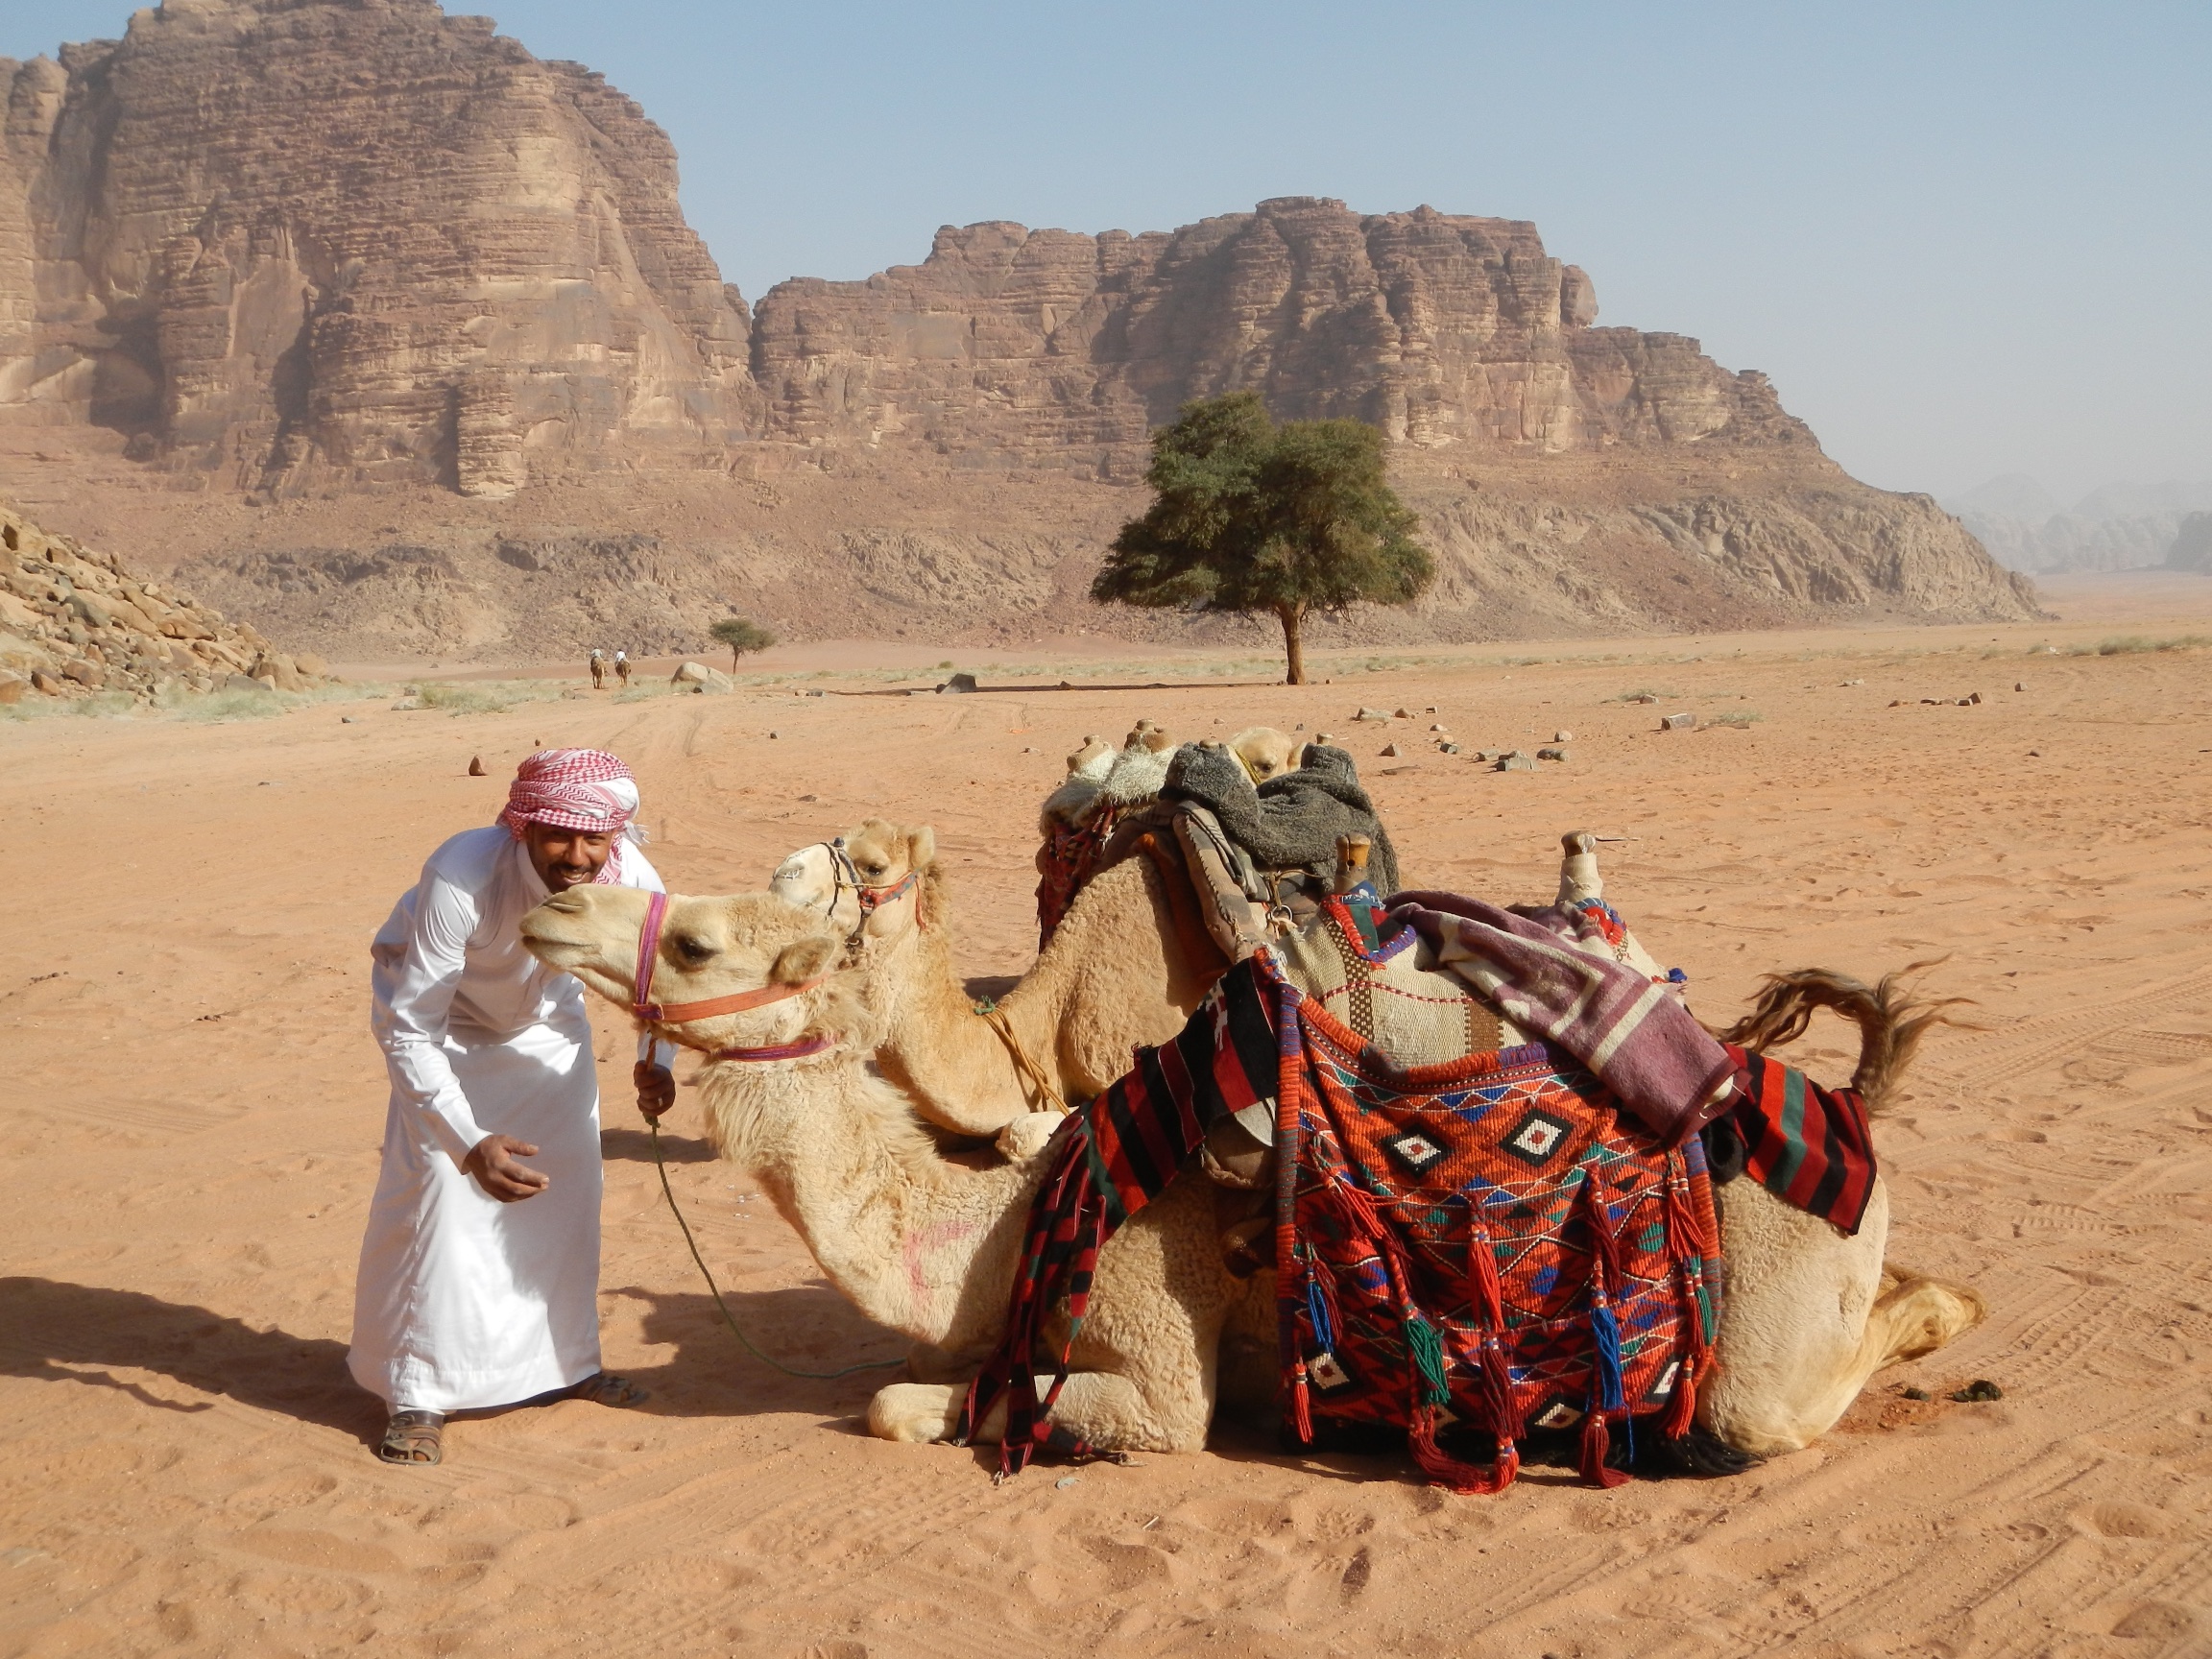  Camel driver with Corinne's camel, Wadi Rum 